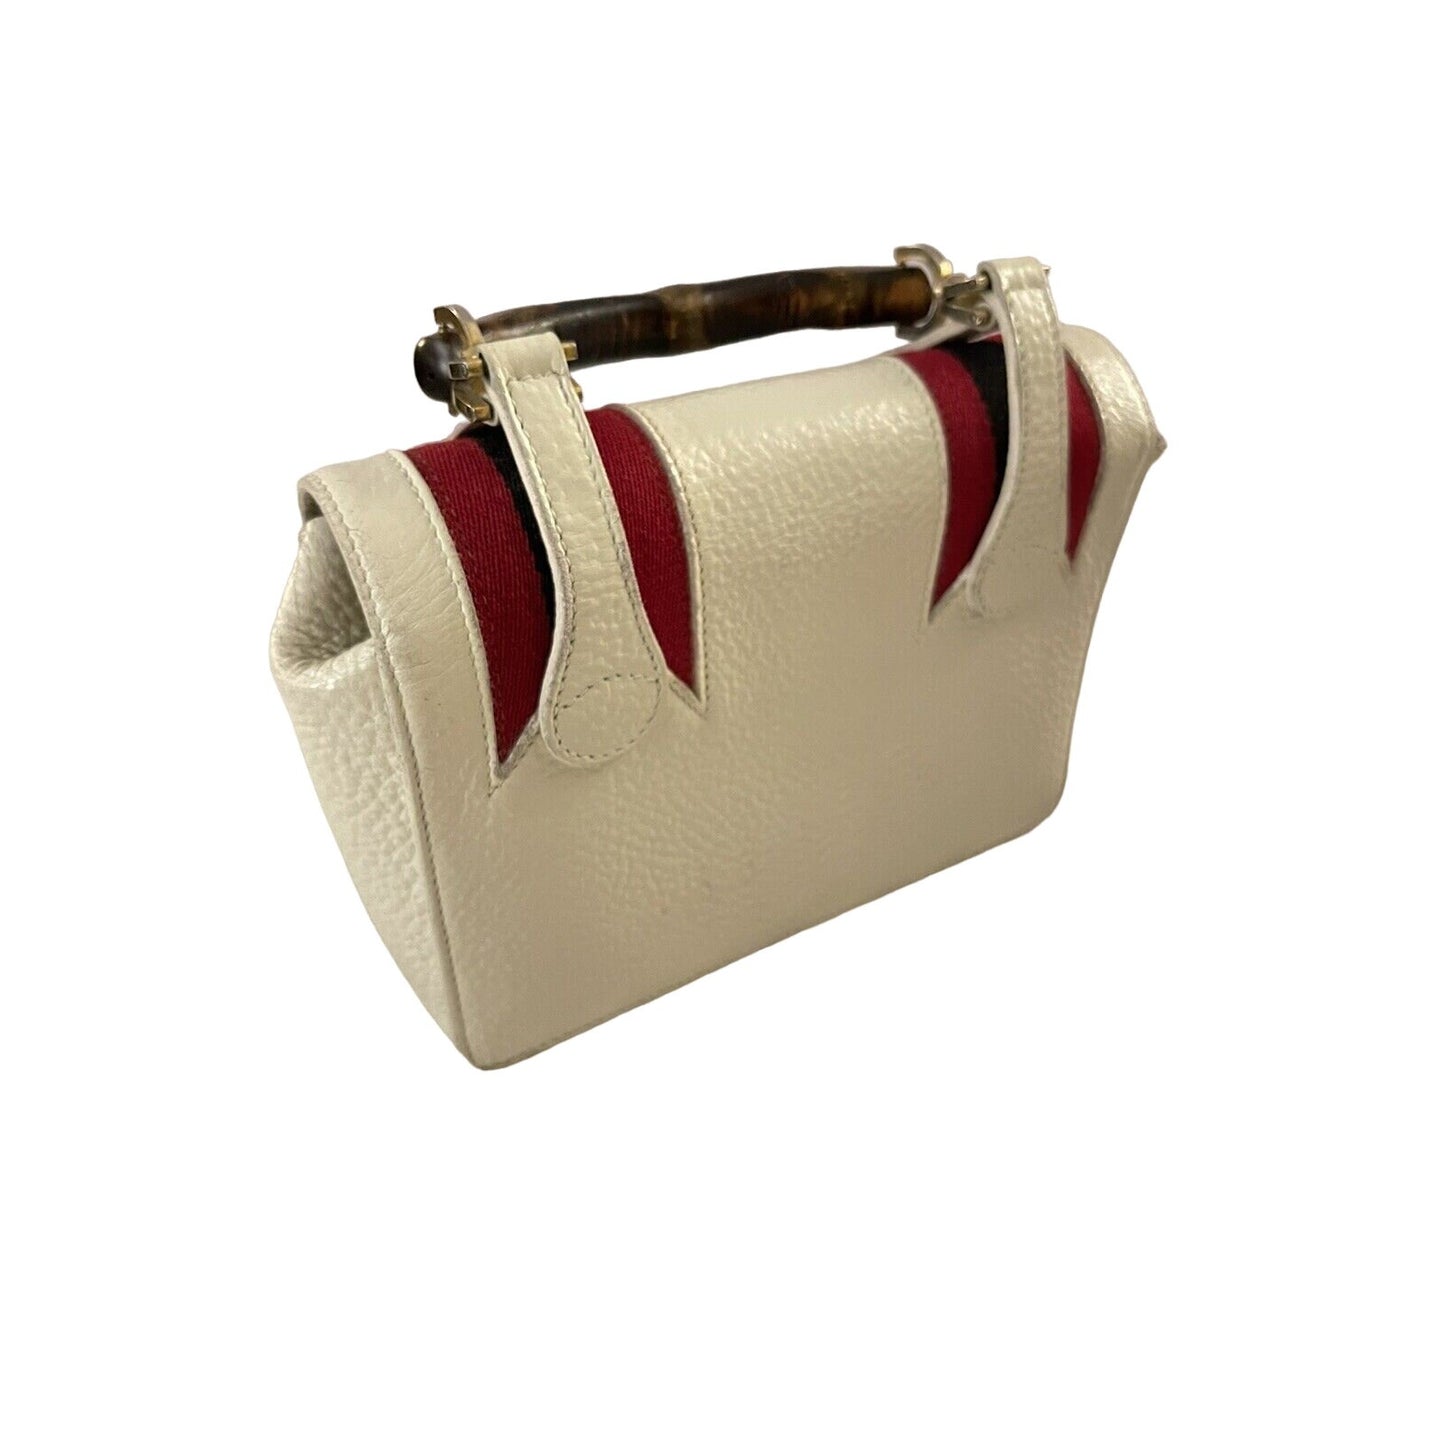 RARE Gucci white leather lunchbox bamboo bag w red & blue stripes